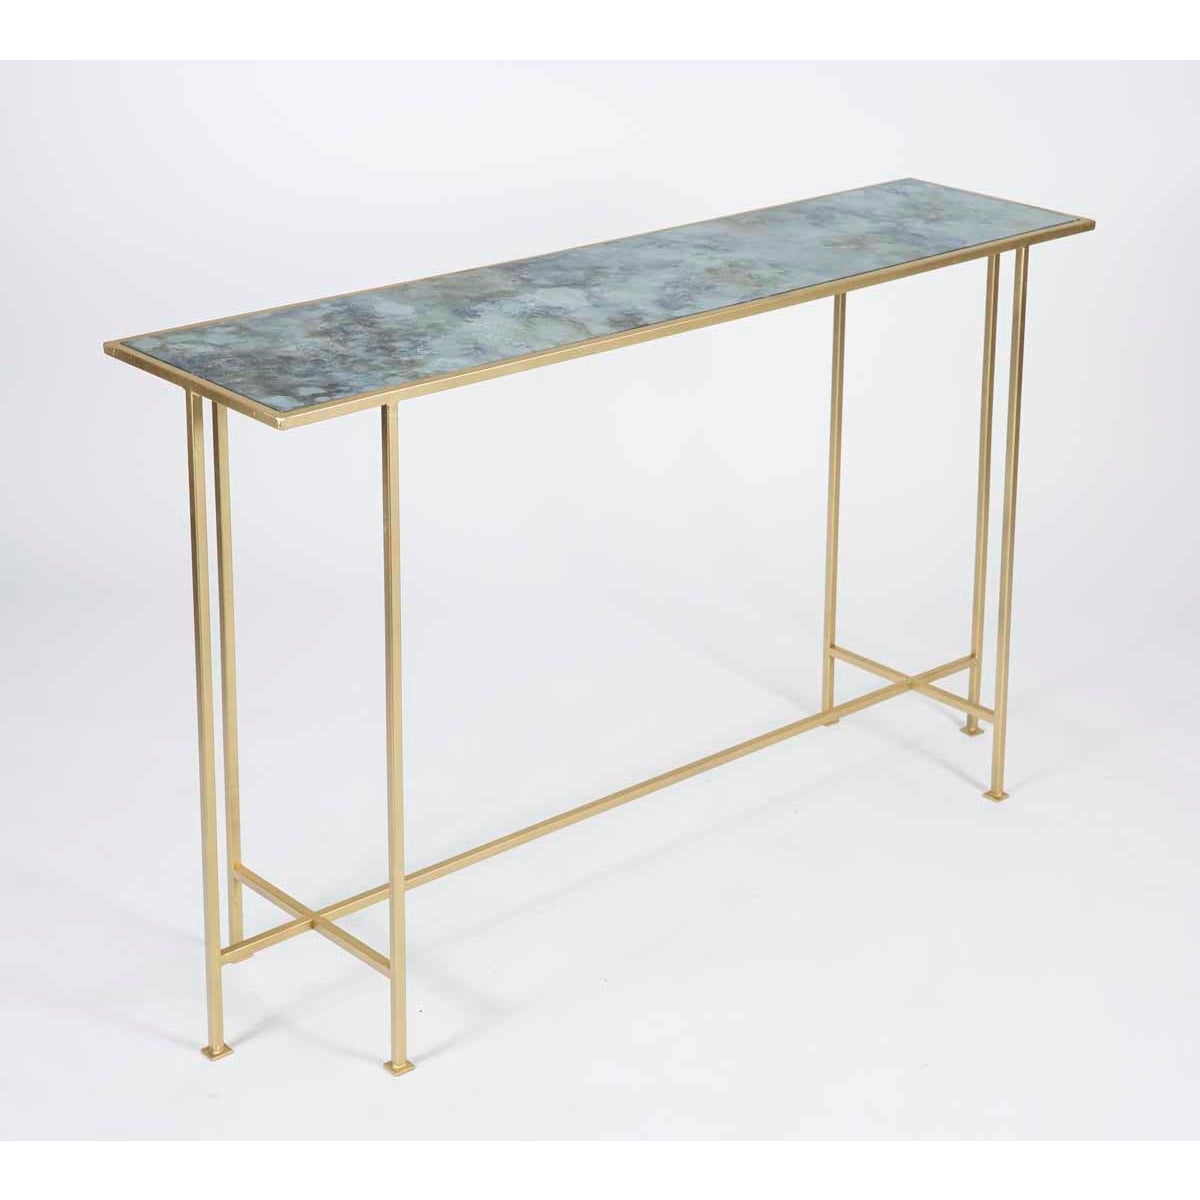 Macon Console Table in Gold with Glass Shelf in Cathedral Stone Finish